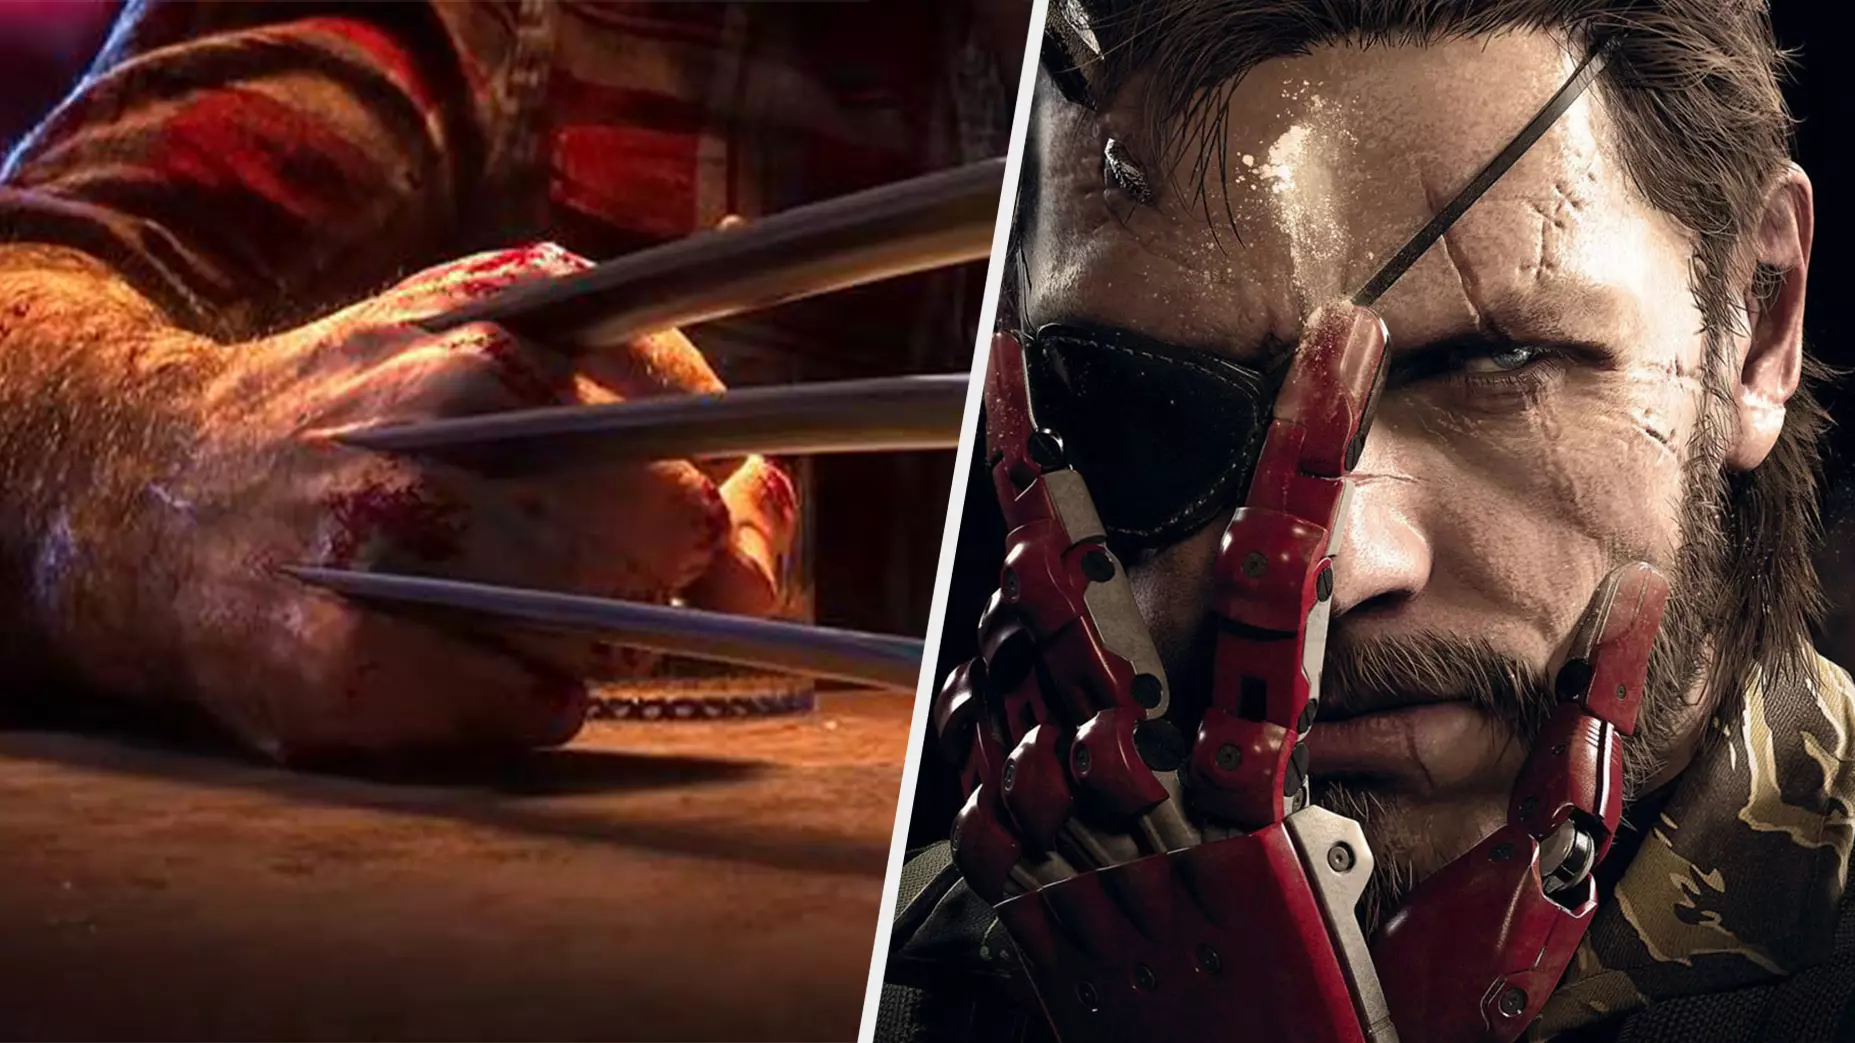 Metal Gear's David Hayter Wants To Play Wolverine In New Game